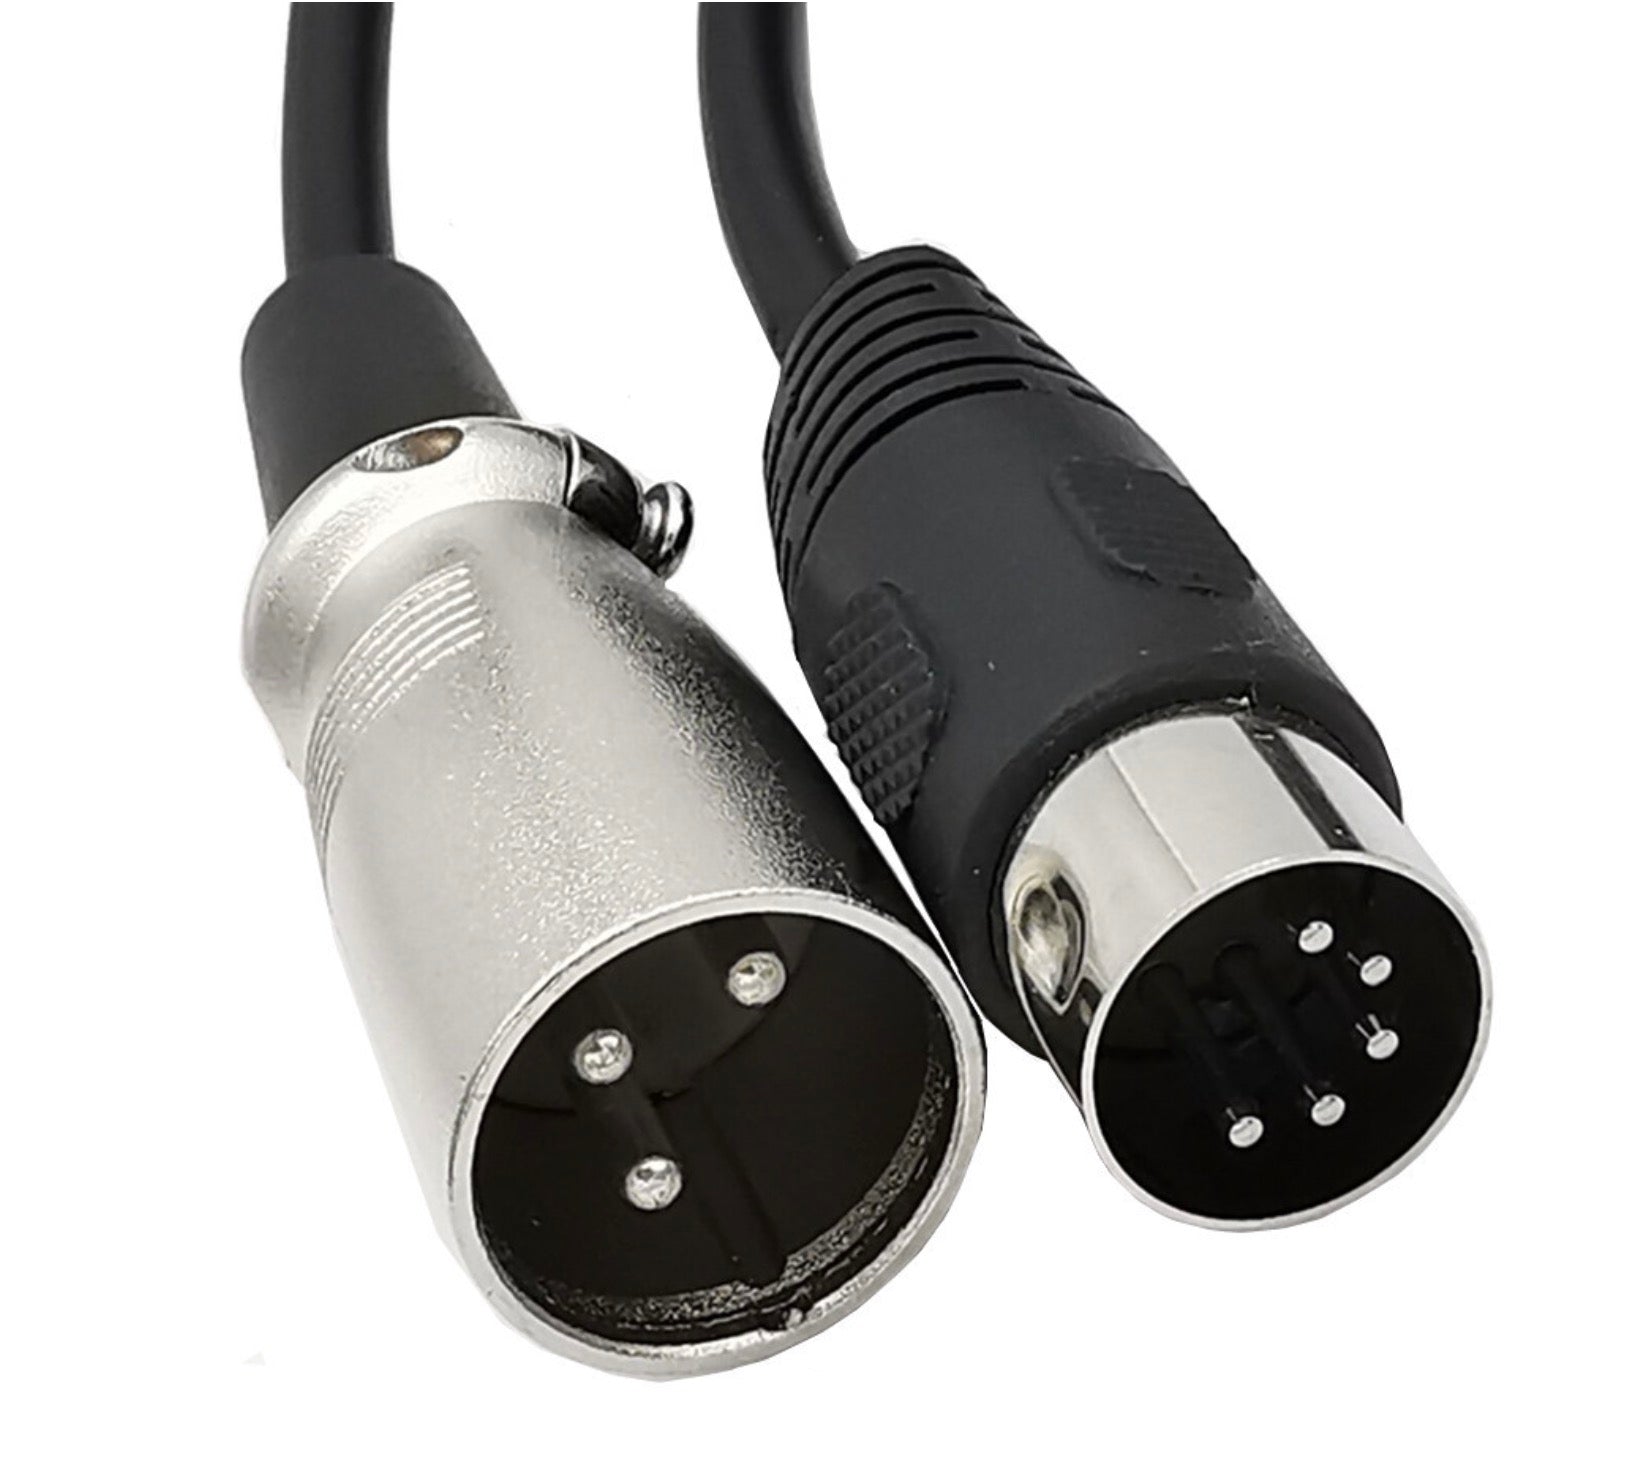 5-Pin Din Male to XLR 3 Pin Male Audio Cable for Musical Instruments